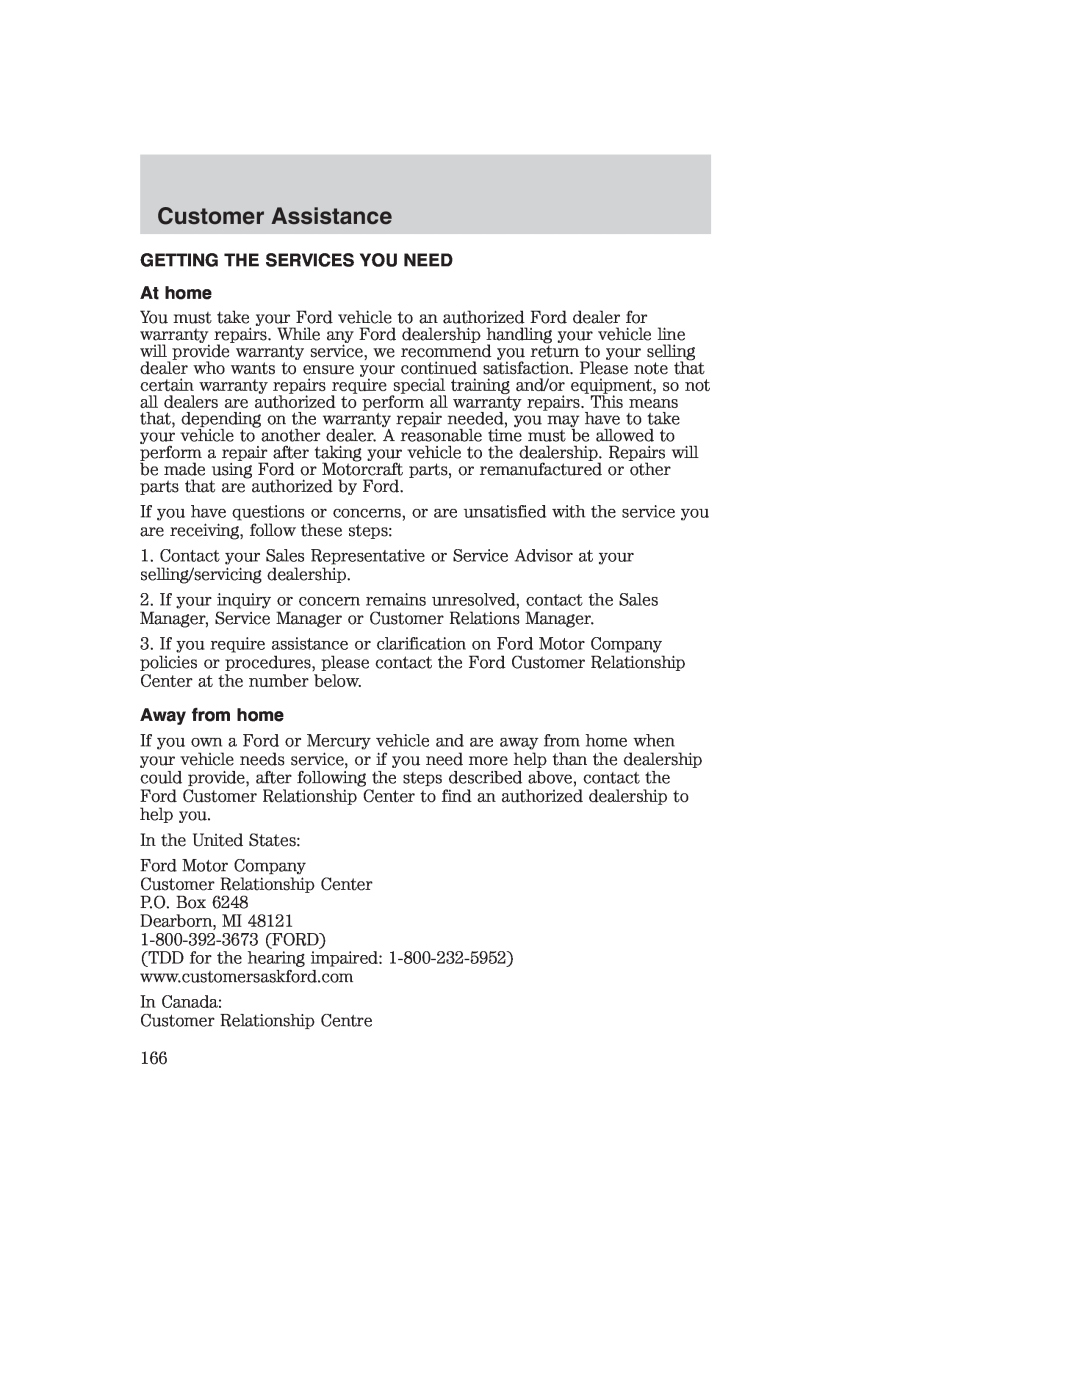 Ford AM/FM stereo manual Customer Assistance, GETTING THE SERVICES YOU NEED At home, Away from home 